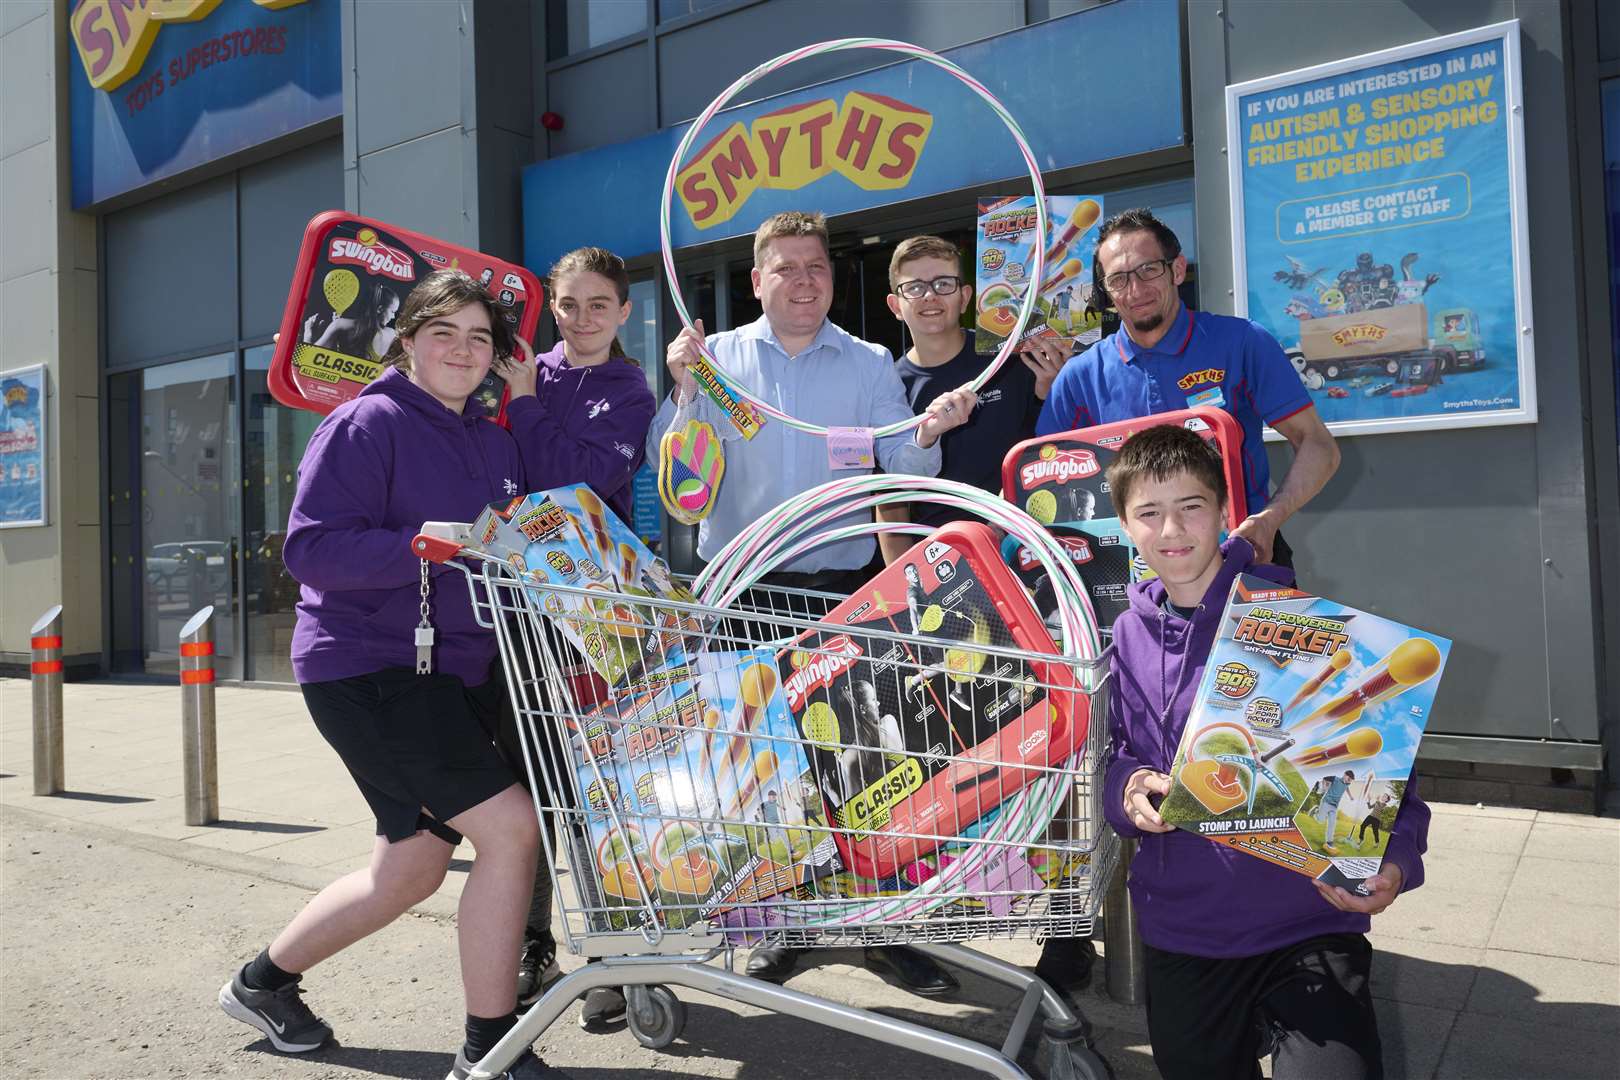 Barry Martin (third left) and Xisco Cejudo (second right) of Smyths, with (from left) High Life Highland Young Leaders Rosie Walker, Maisie Walker, Archie Webster and Ryan Lawrence-MacAskill.